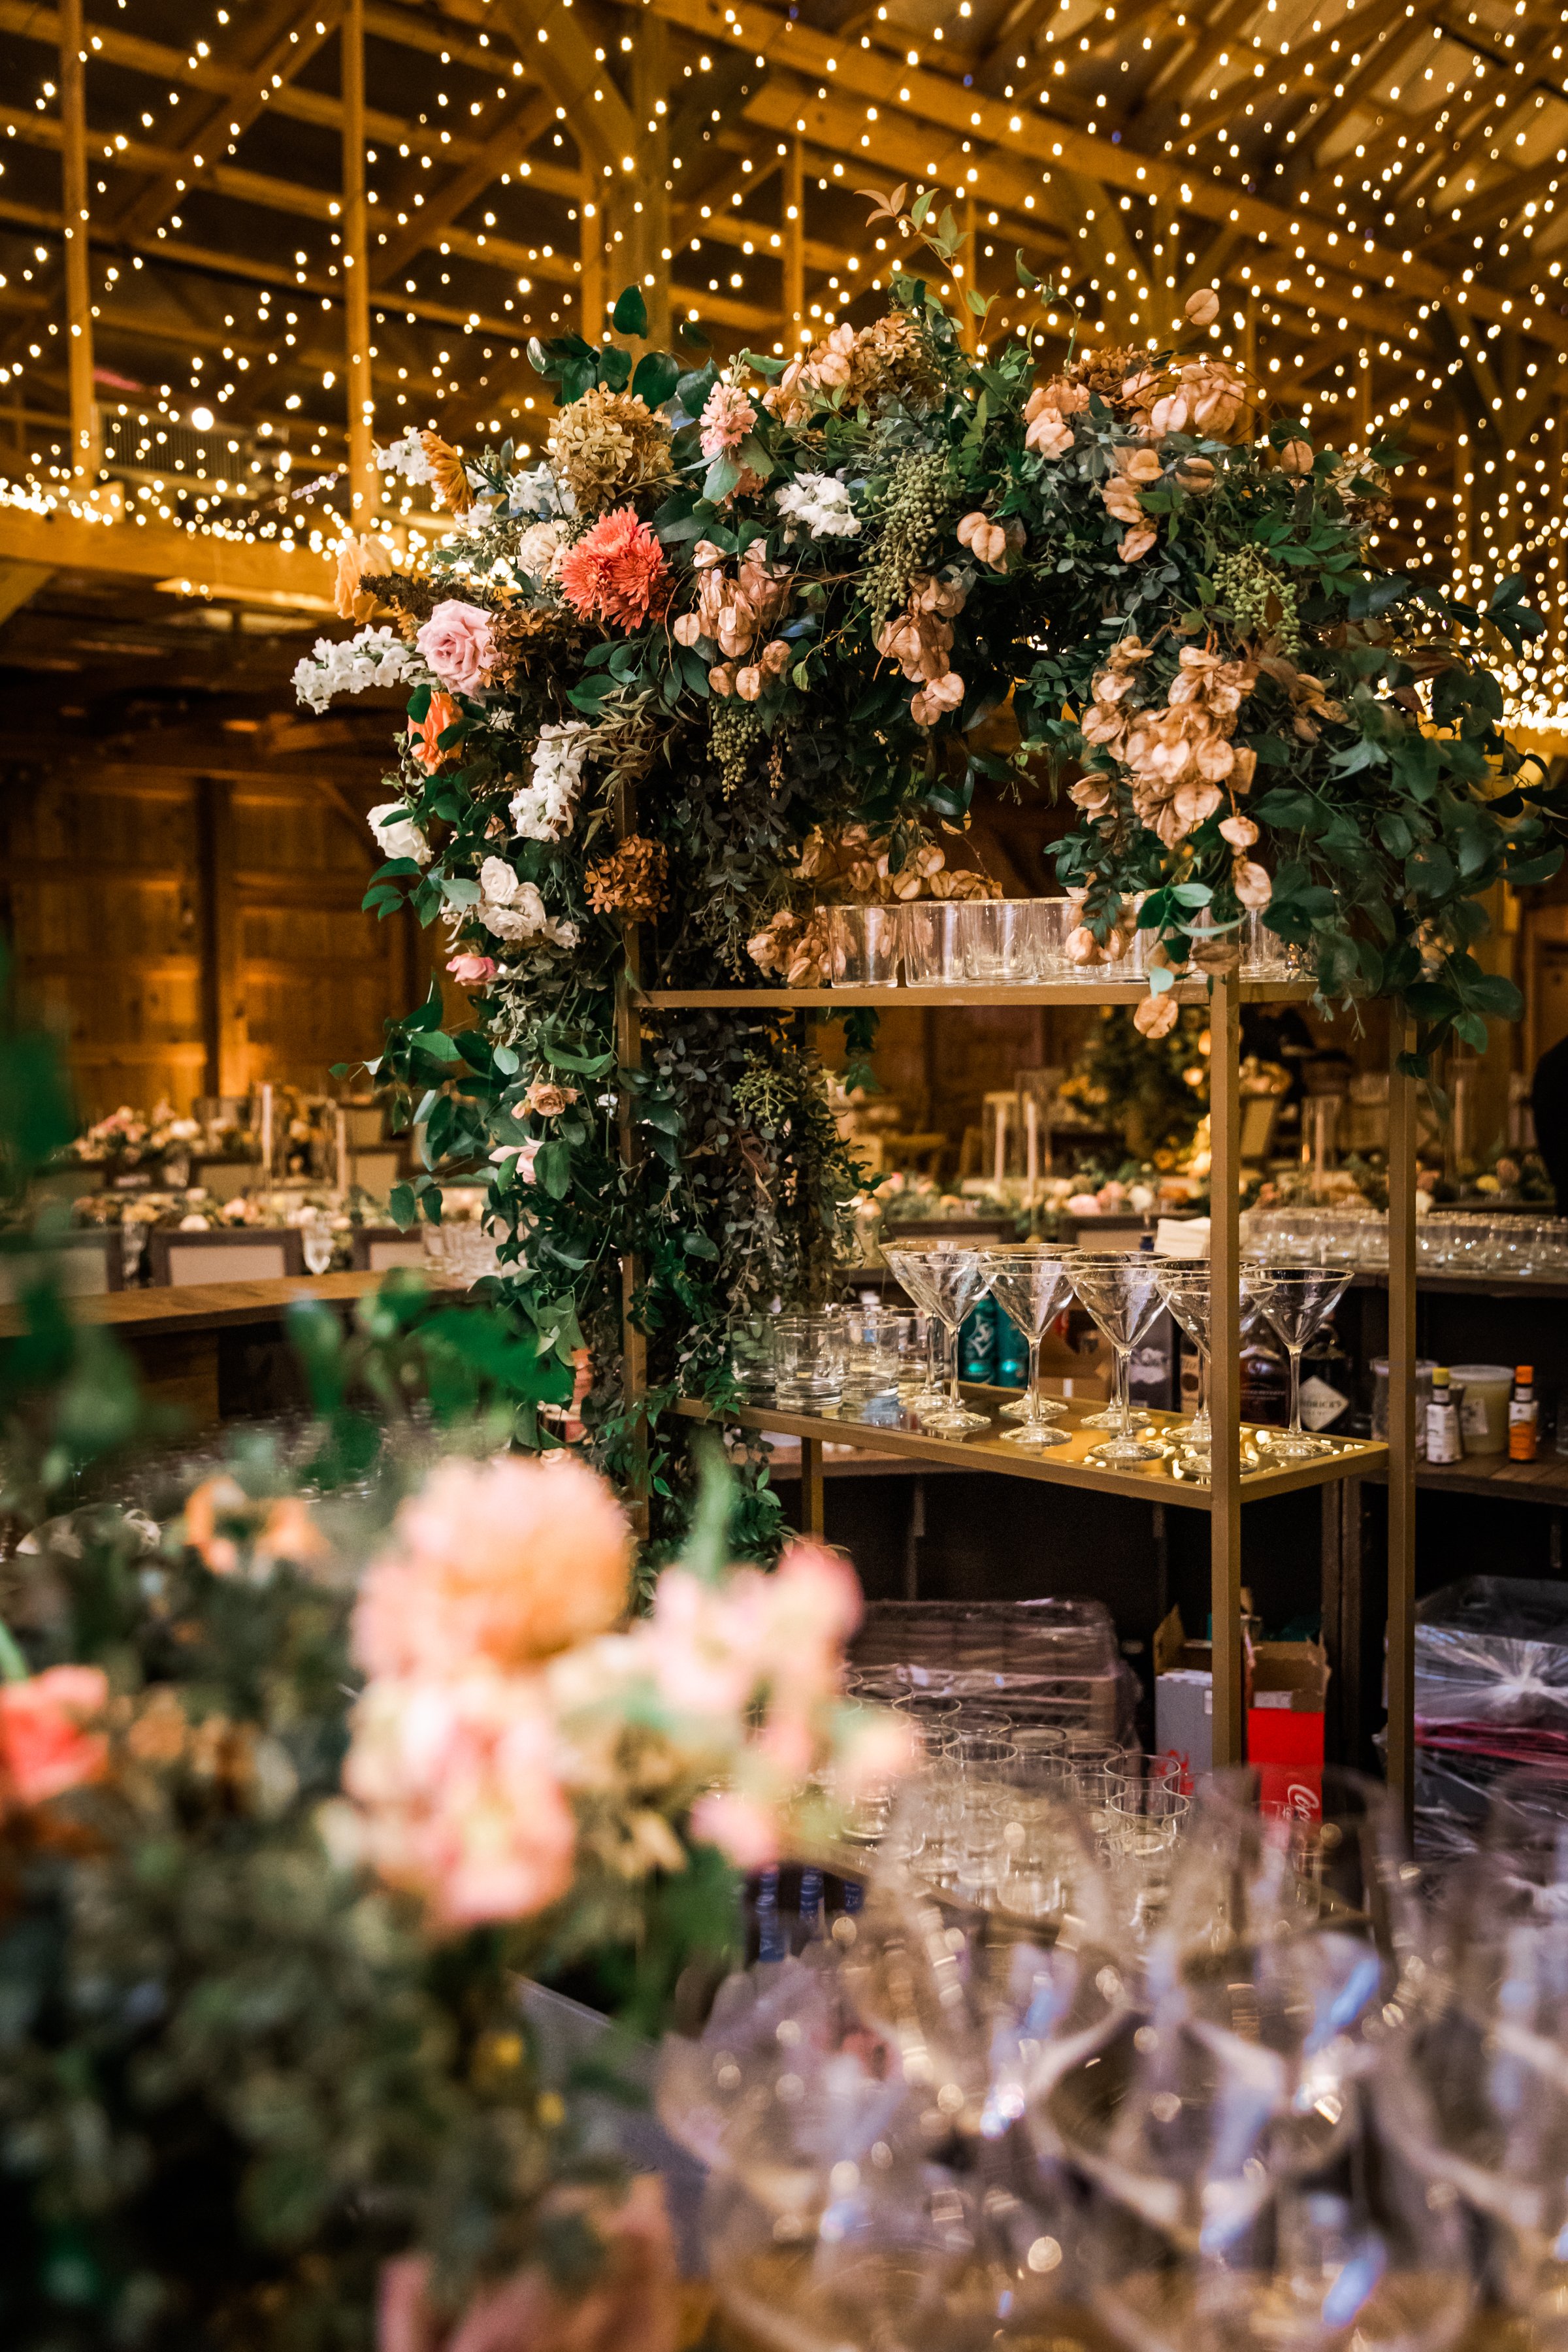 Stunning fall floral installation frame the bar area of this autumnal wedding. Hues of blush, terra cotta, copper, toffee, yellow, and other neutrals are highlighted with dahlias, roses, and double brownie tulips. Designed by Rosemary and Finch in Na